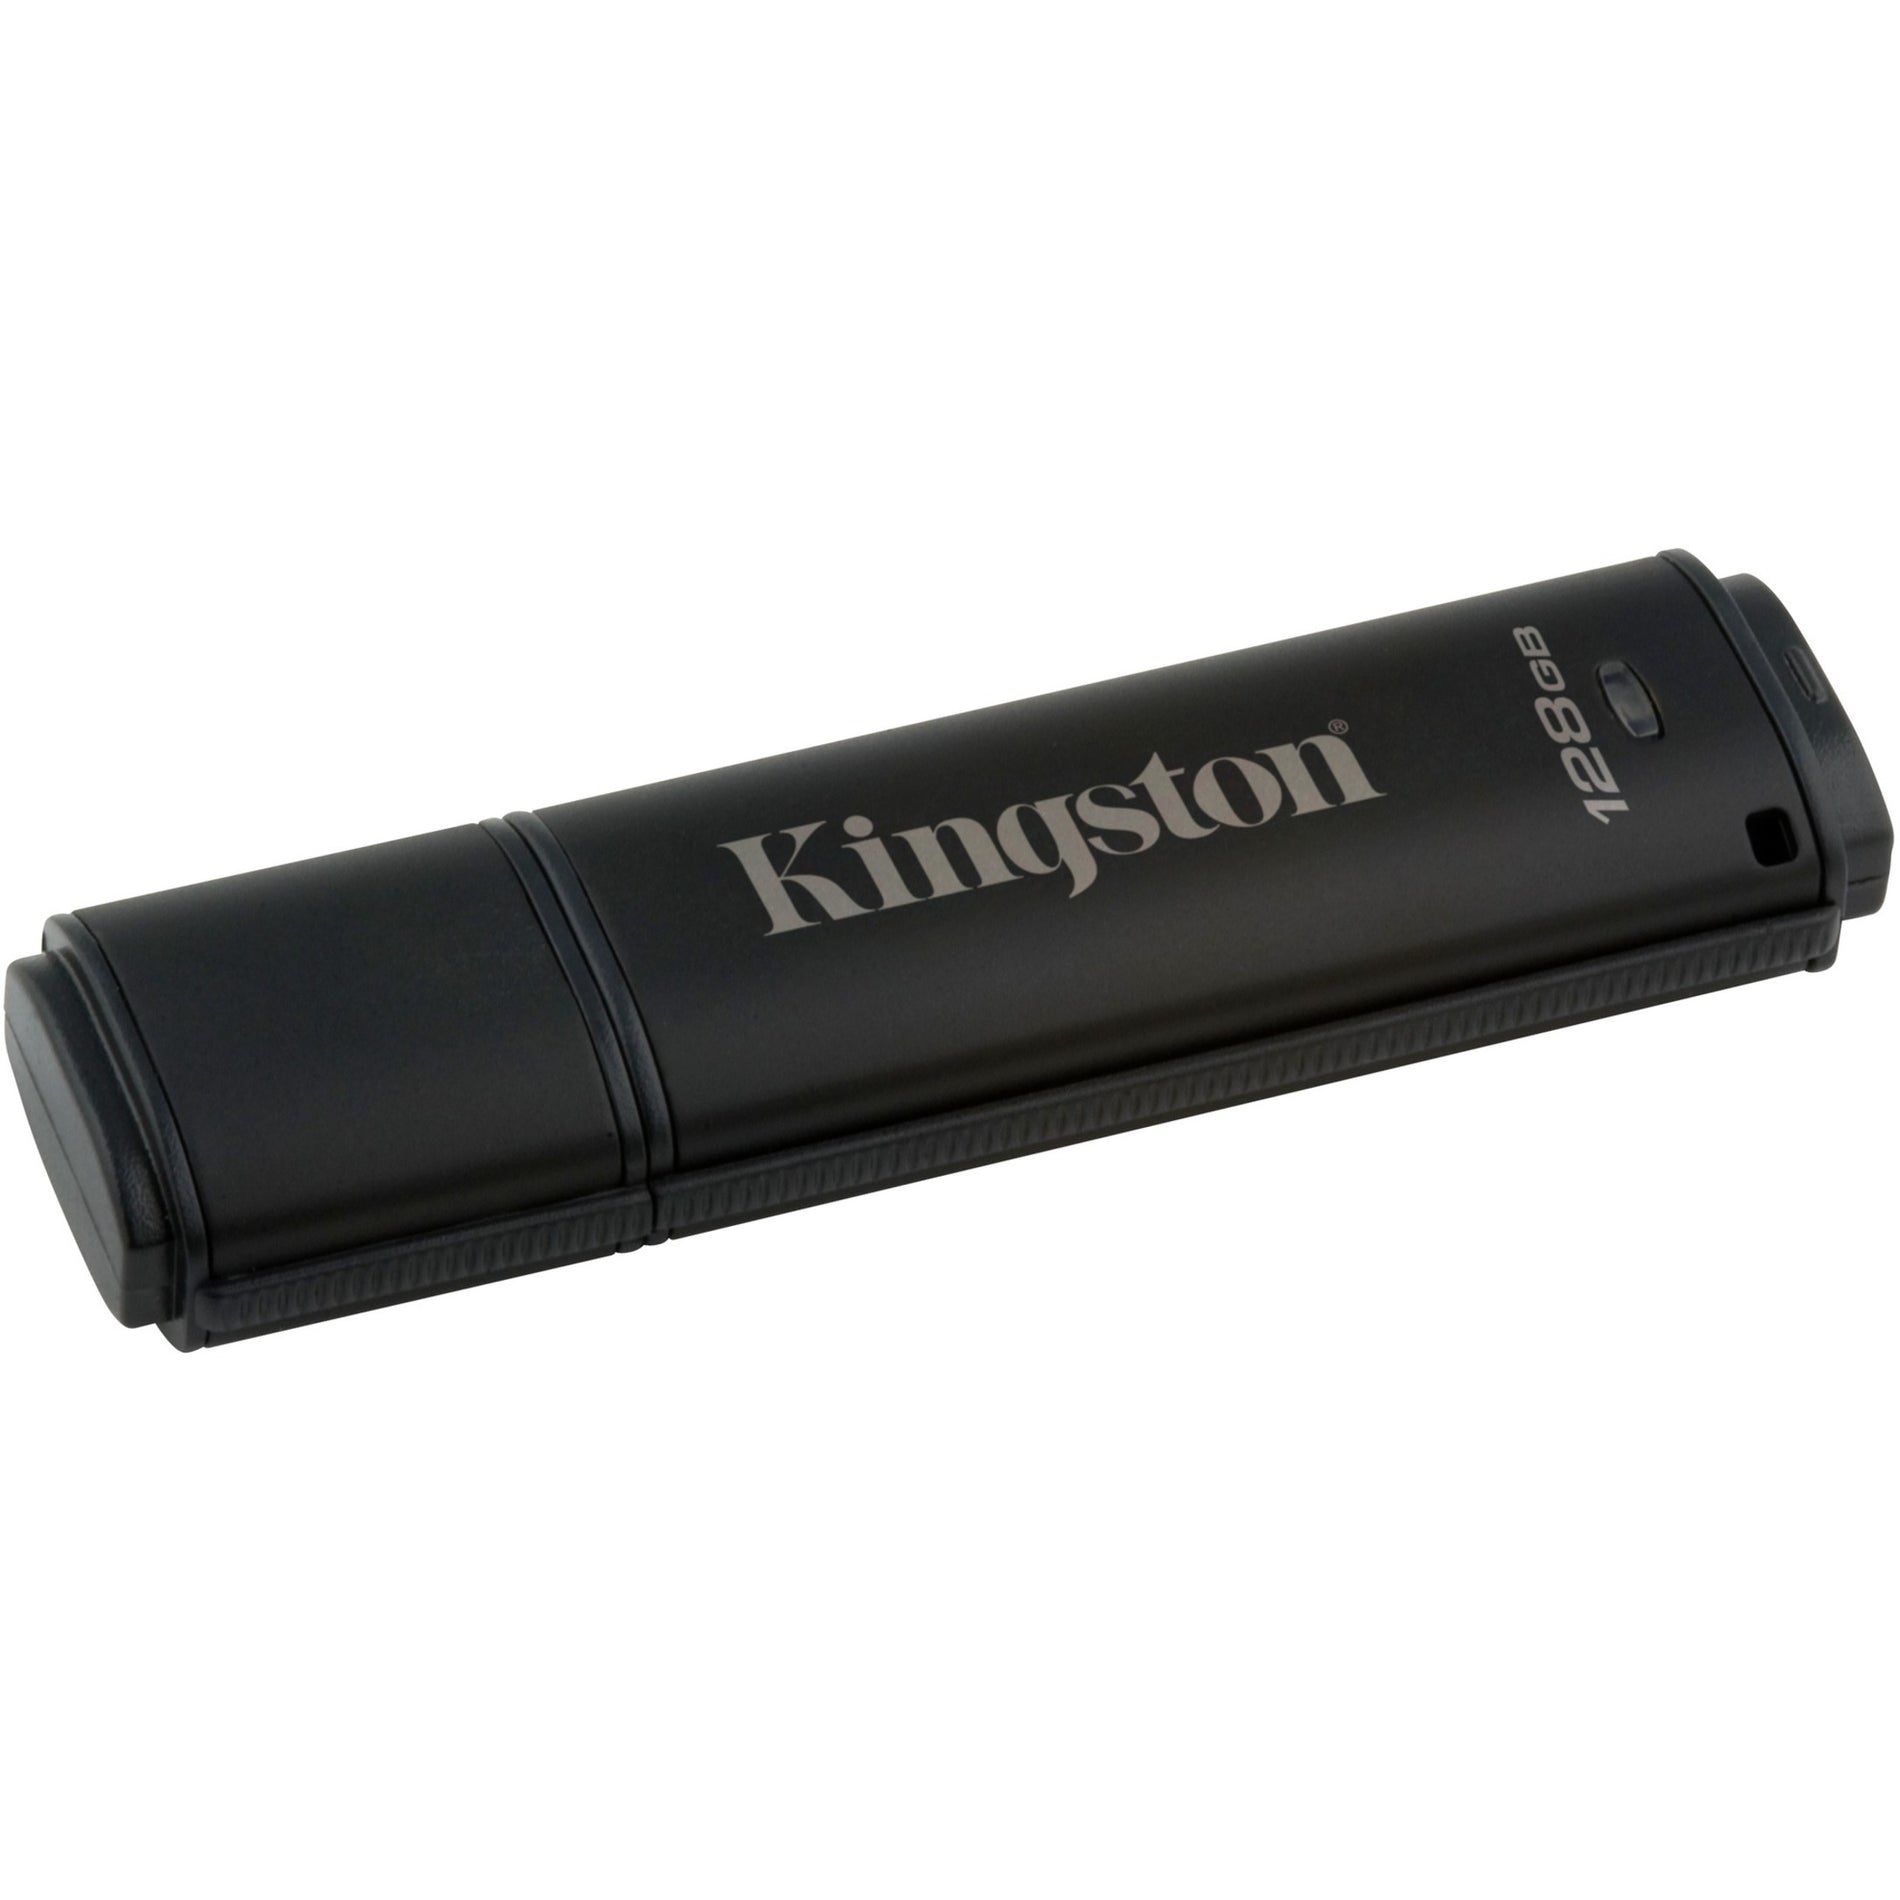 Kingston DT4000G2DM/128GB DT4000G2 ENCRYPTED USB FLASH, 128GB, Water Proof, Auto-locking, Password Protection, Hardware Encryption